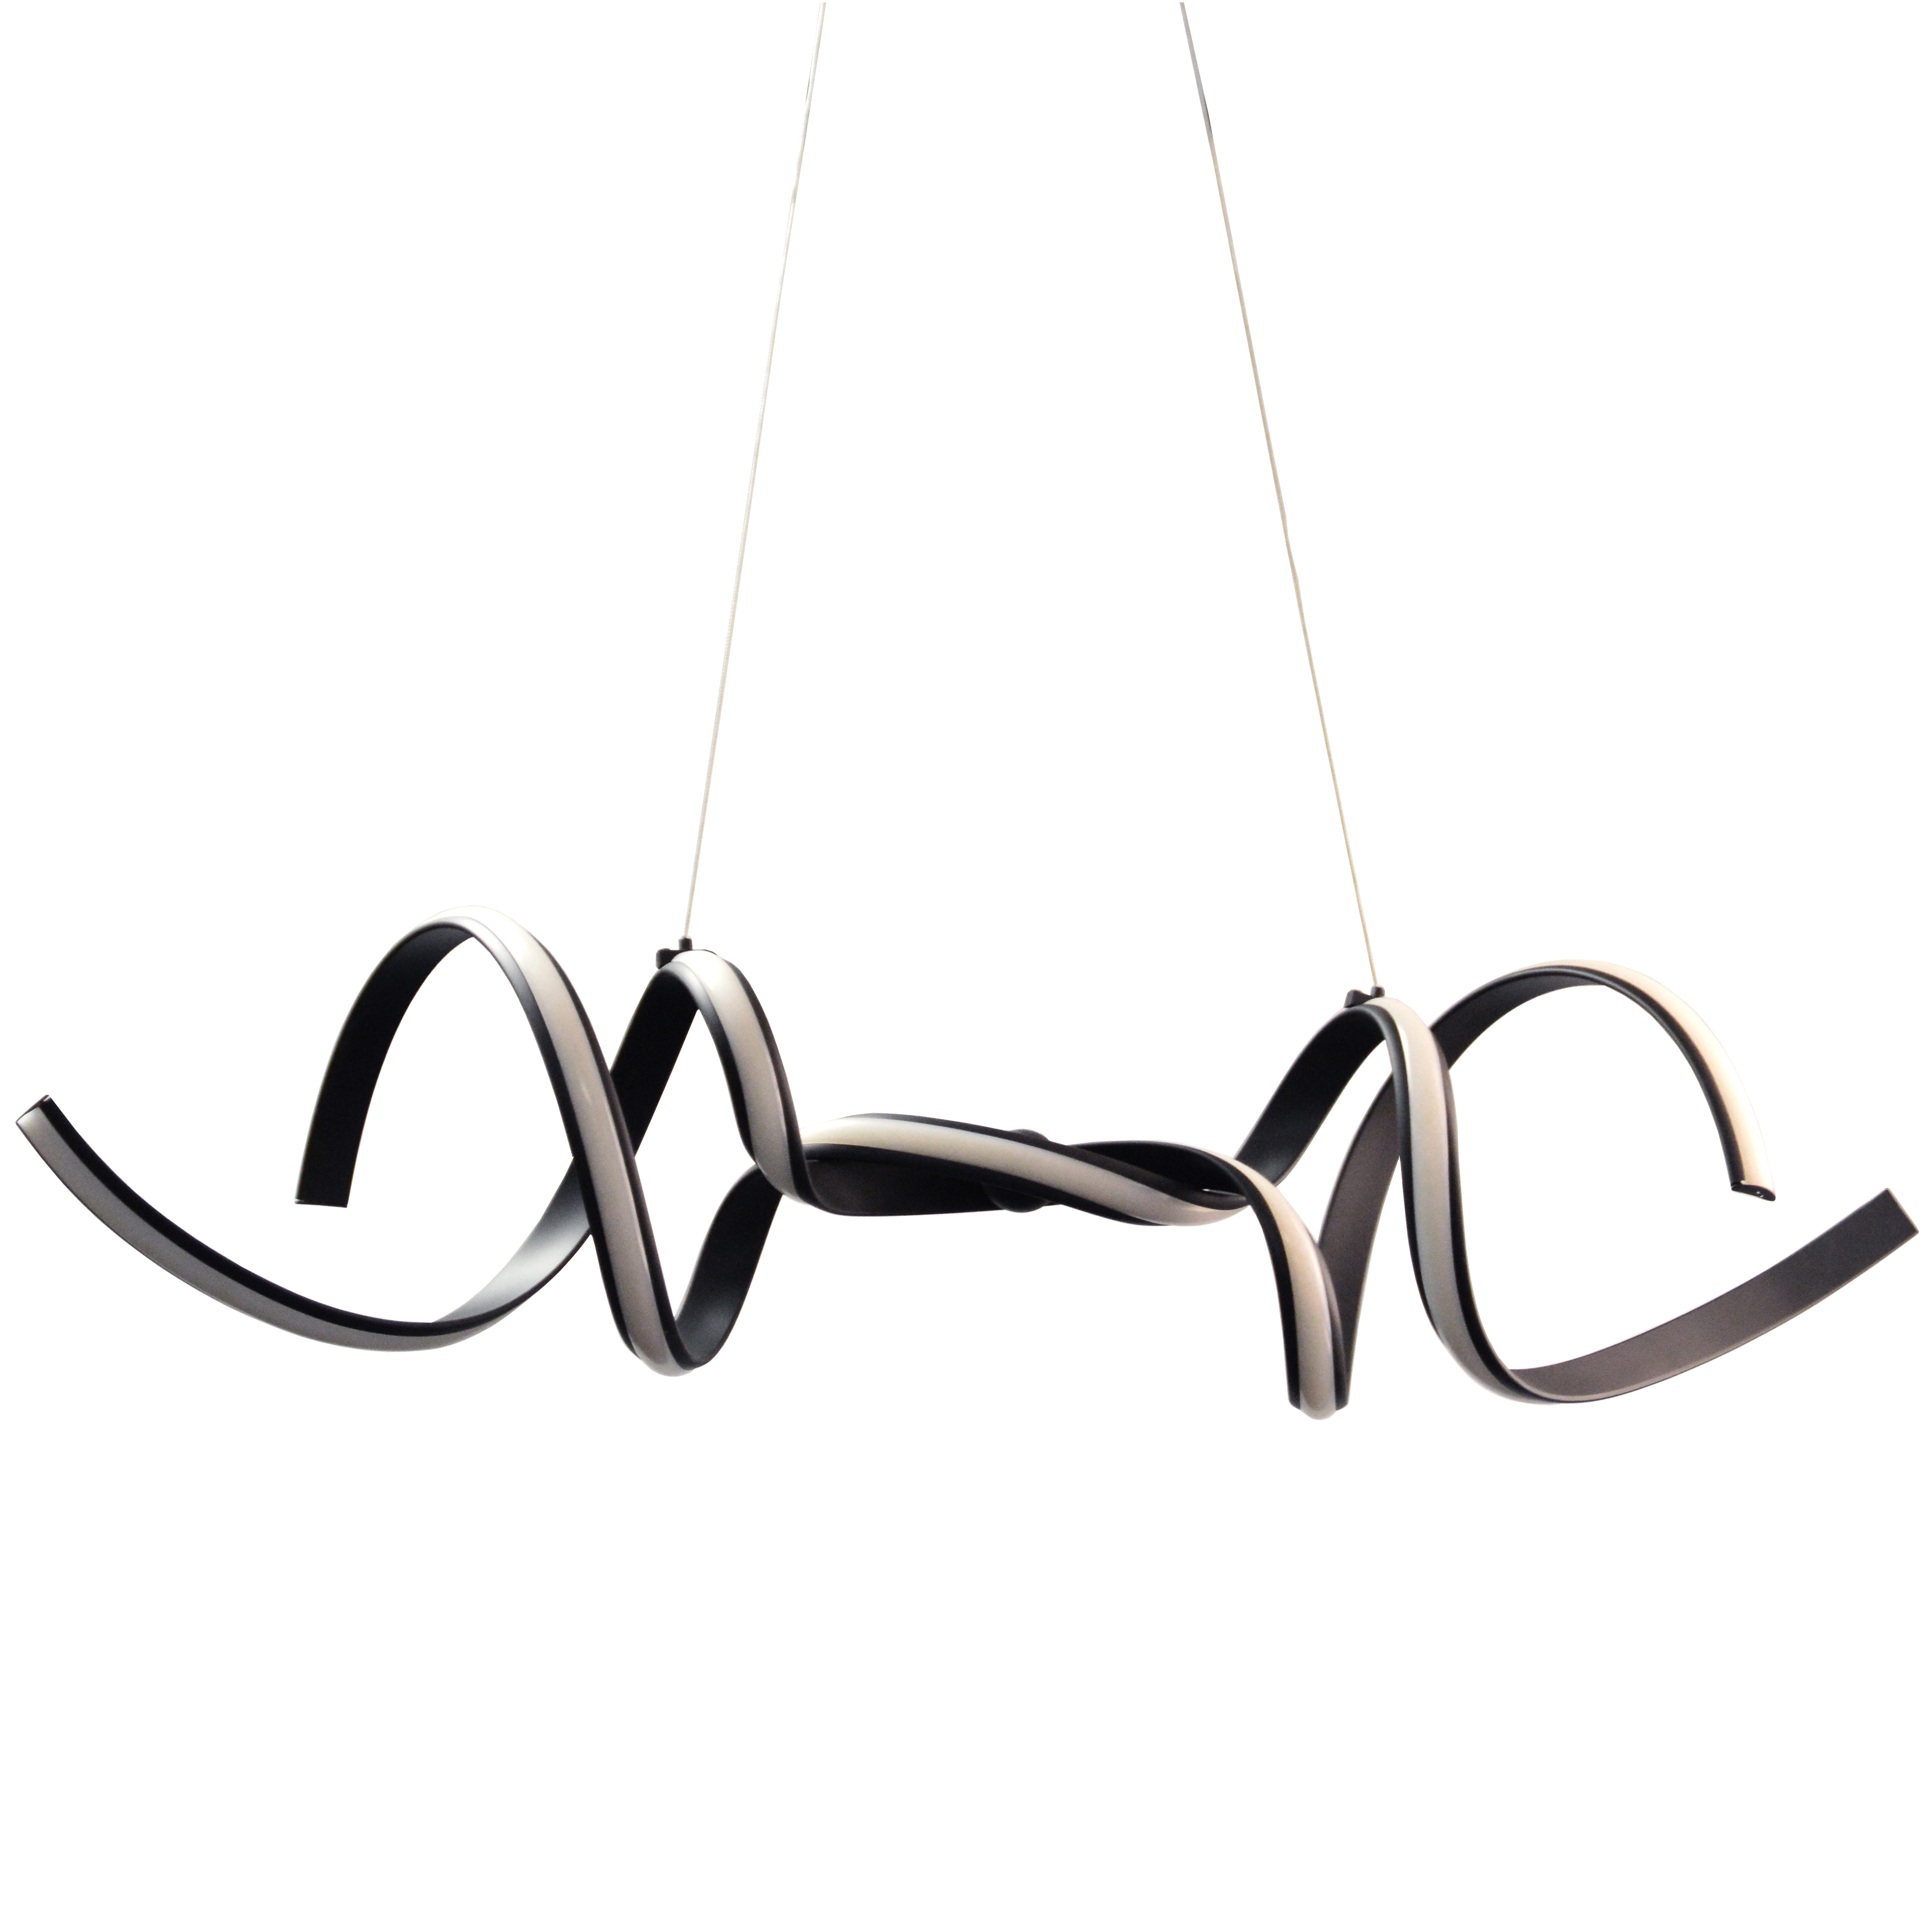 The Irene family of fixtures will add undeniable artisan-style flair to any space within your home. With its mesmerizing design, it creates undulating movement and welcome curves in ultra-modern and minimalist settings. The intriguing design is crafted in metal with a matte black finish that blends into any color palette. The pendant light is available in either a dramatic horizontal drop, or fascinating vertical configuration, with integrated LED for an ambient glow. An Irene light will be a bold focal point for a hallway or foyer, and draw attention to furnishings in a living or dining room.